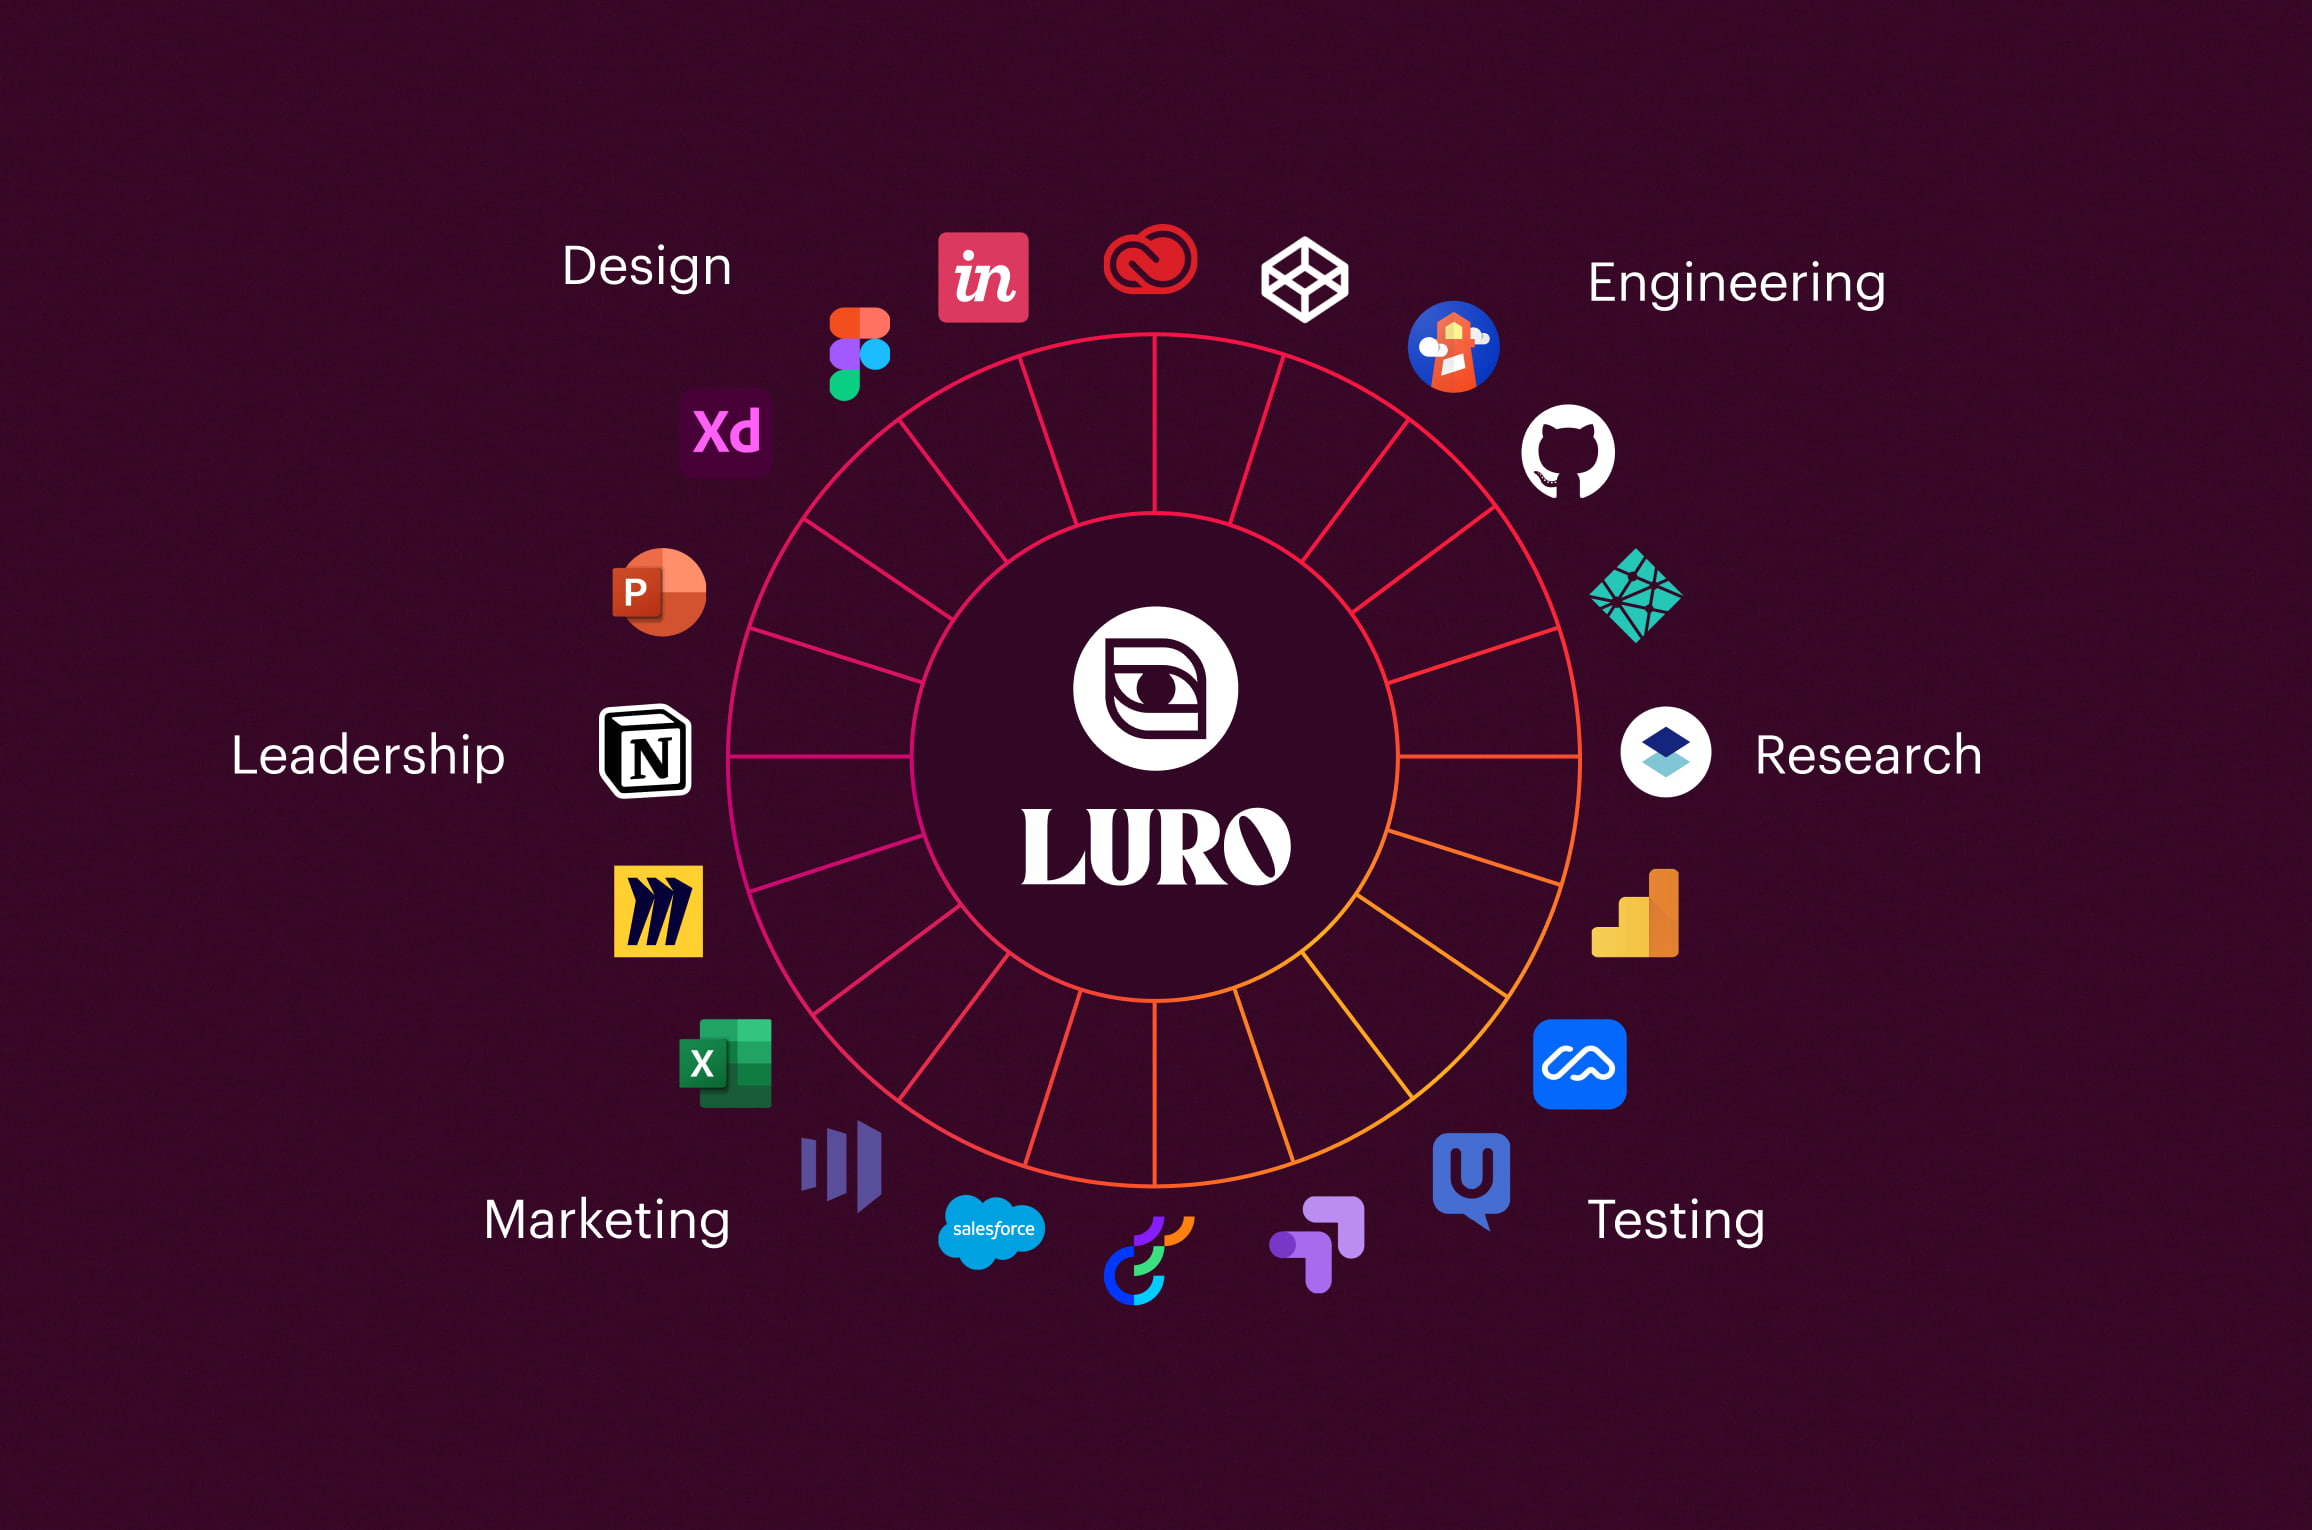 A wheel of SaaS products labelled clockwise as Engineering, Research, Testing, Marketing, Leadership, and Design around a hub with Luro in the middle.